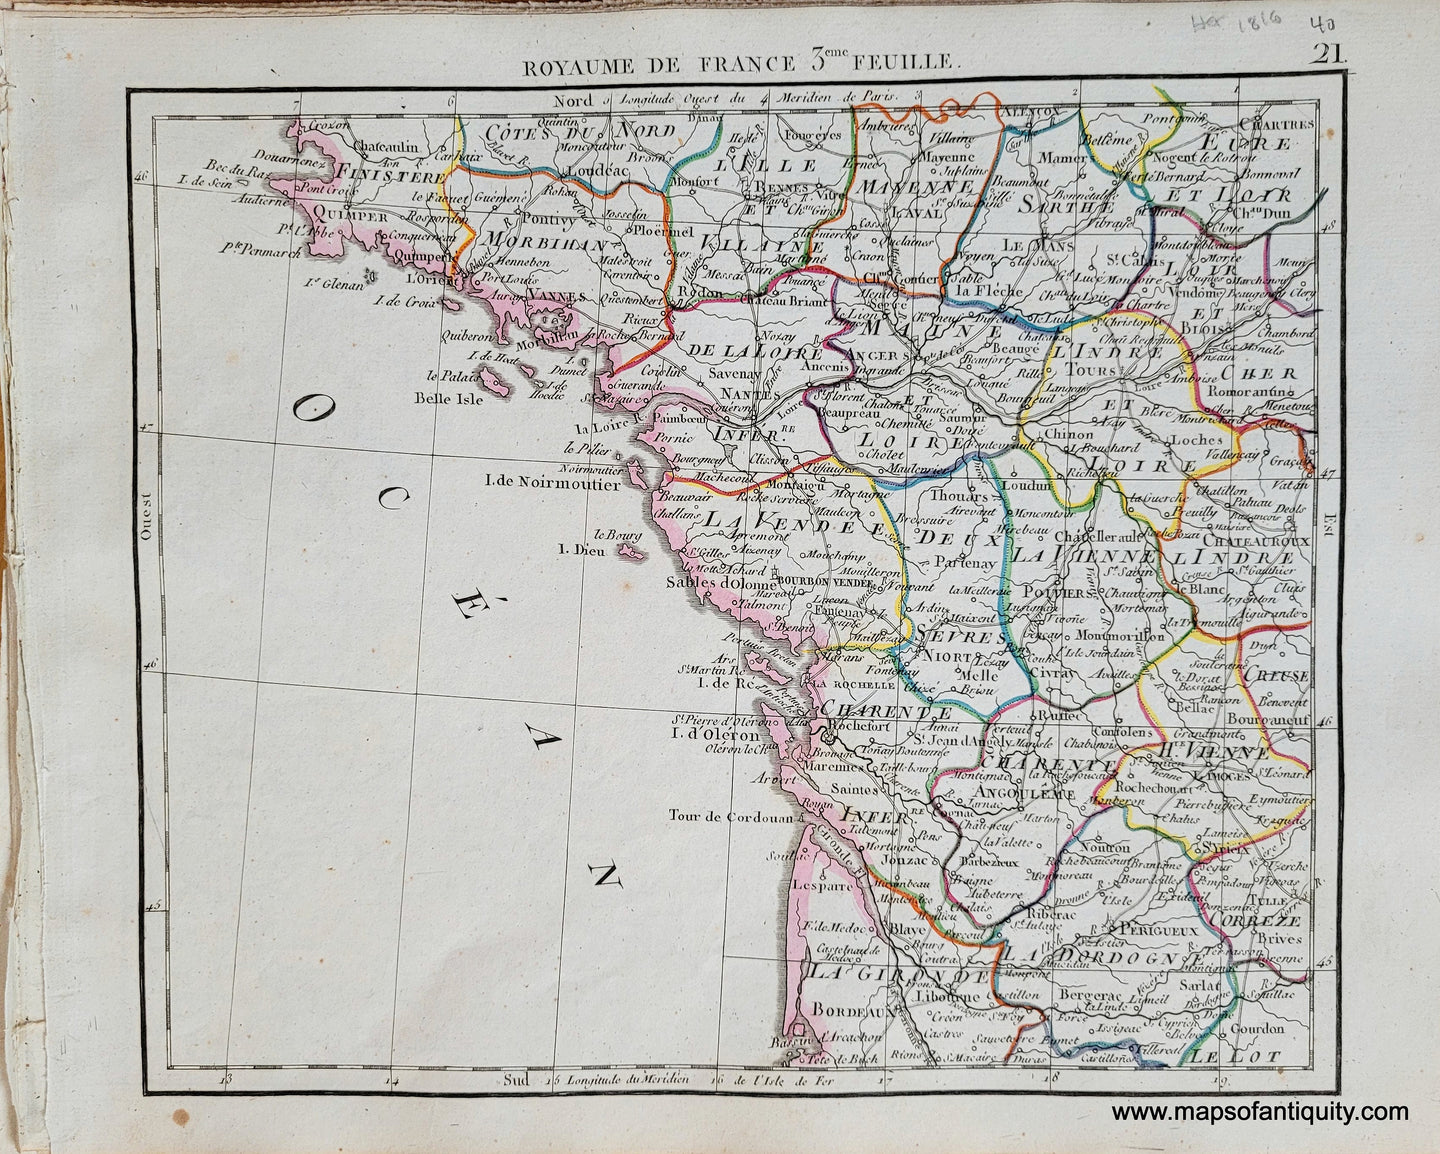 Genuine-Antique-Map-France-in-6-sheets-Sheet-3-Royaume-de-France-3eme-Feuille-France-1816-Herisson-Maps-Of-Antiquity-1800s-19th-century